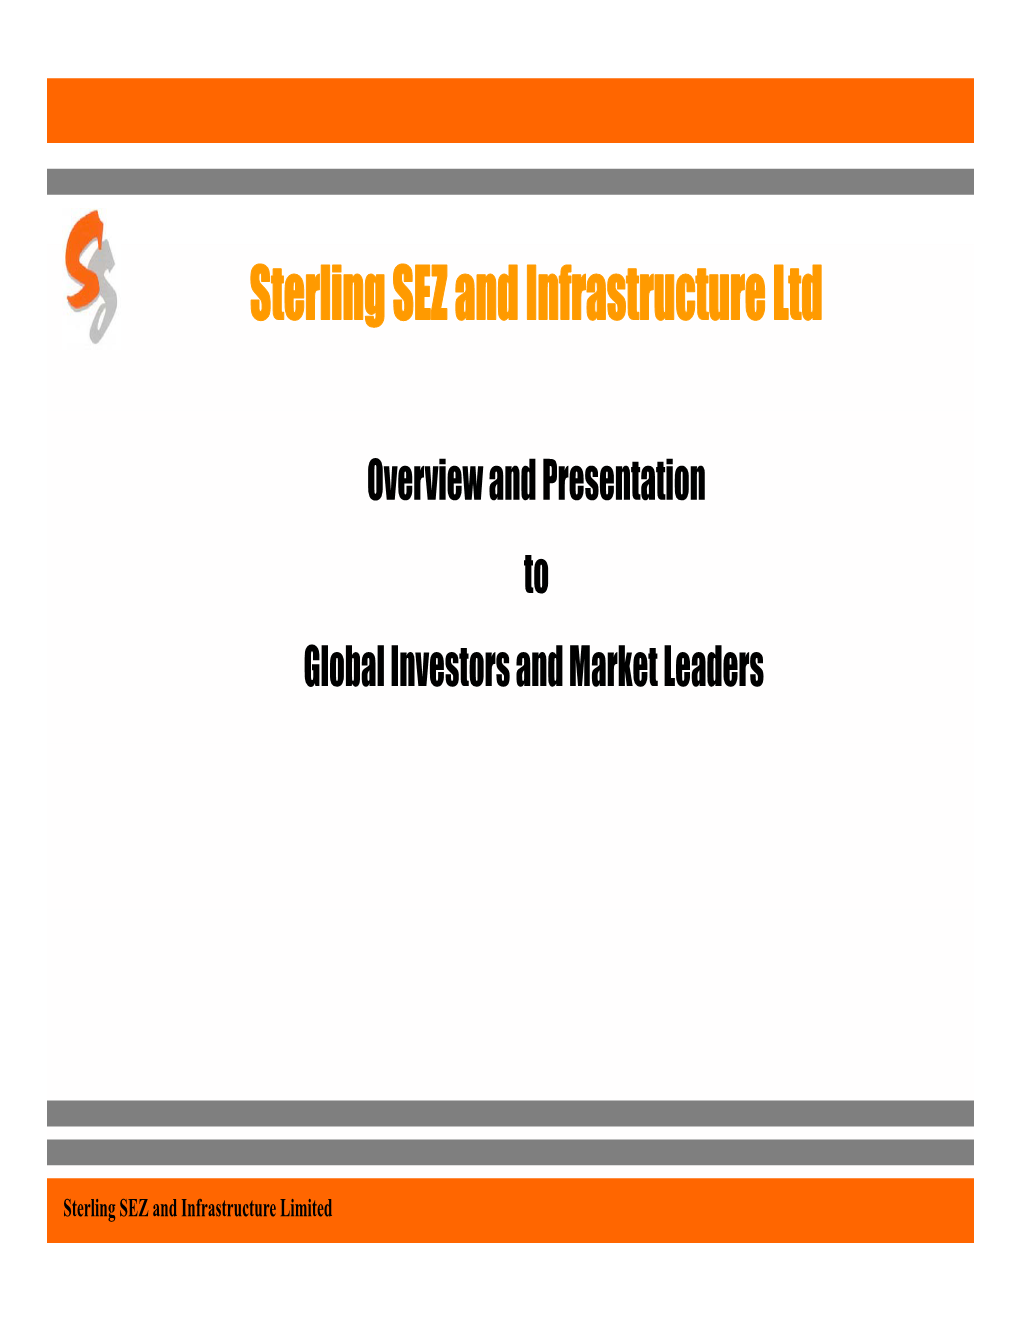 Sterling SEZ and Infrastructure Ltd